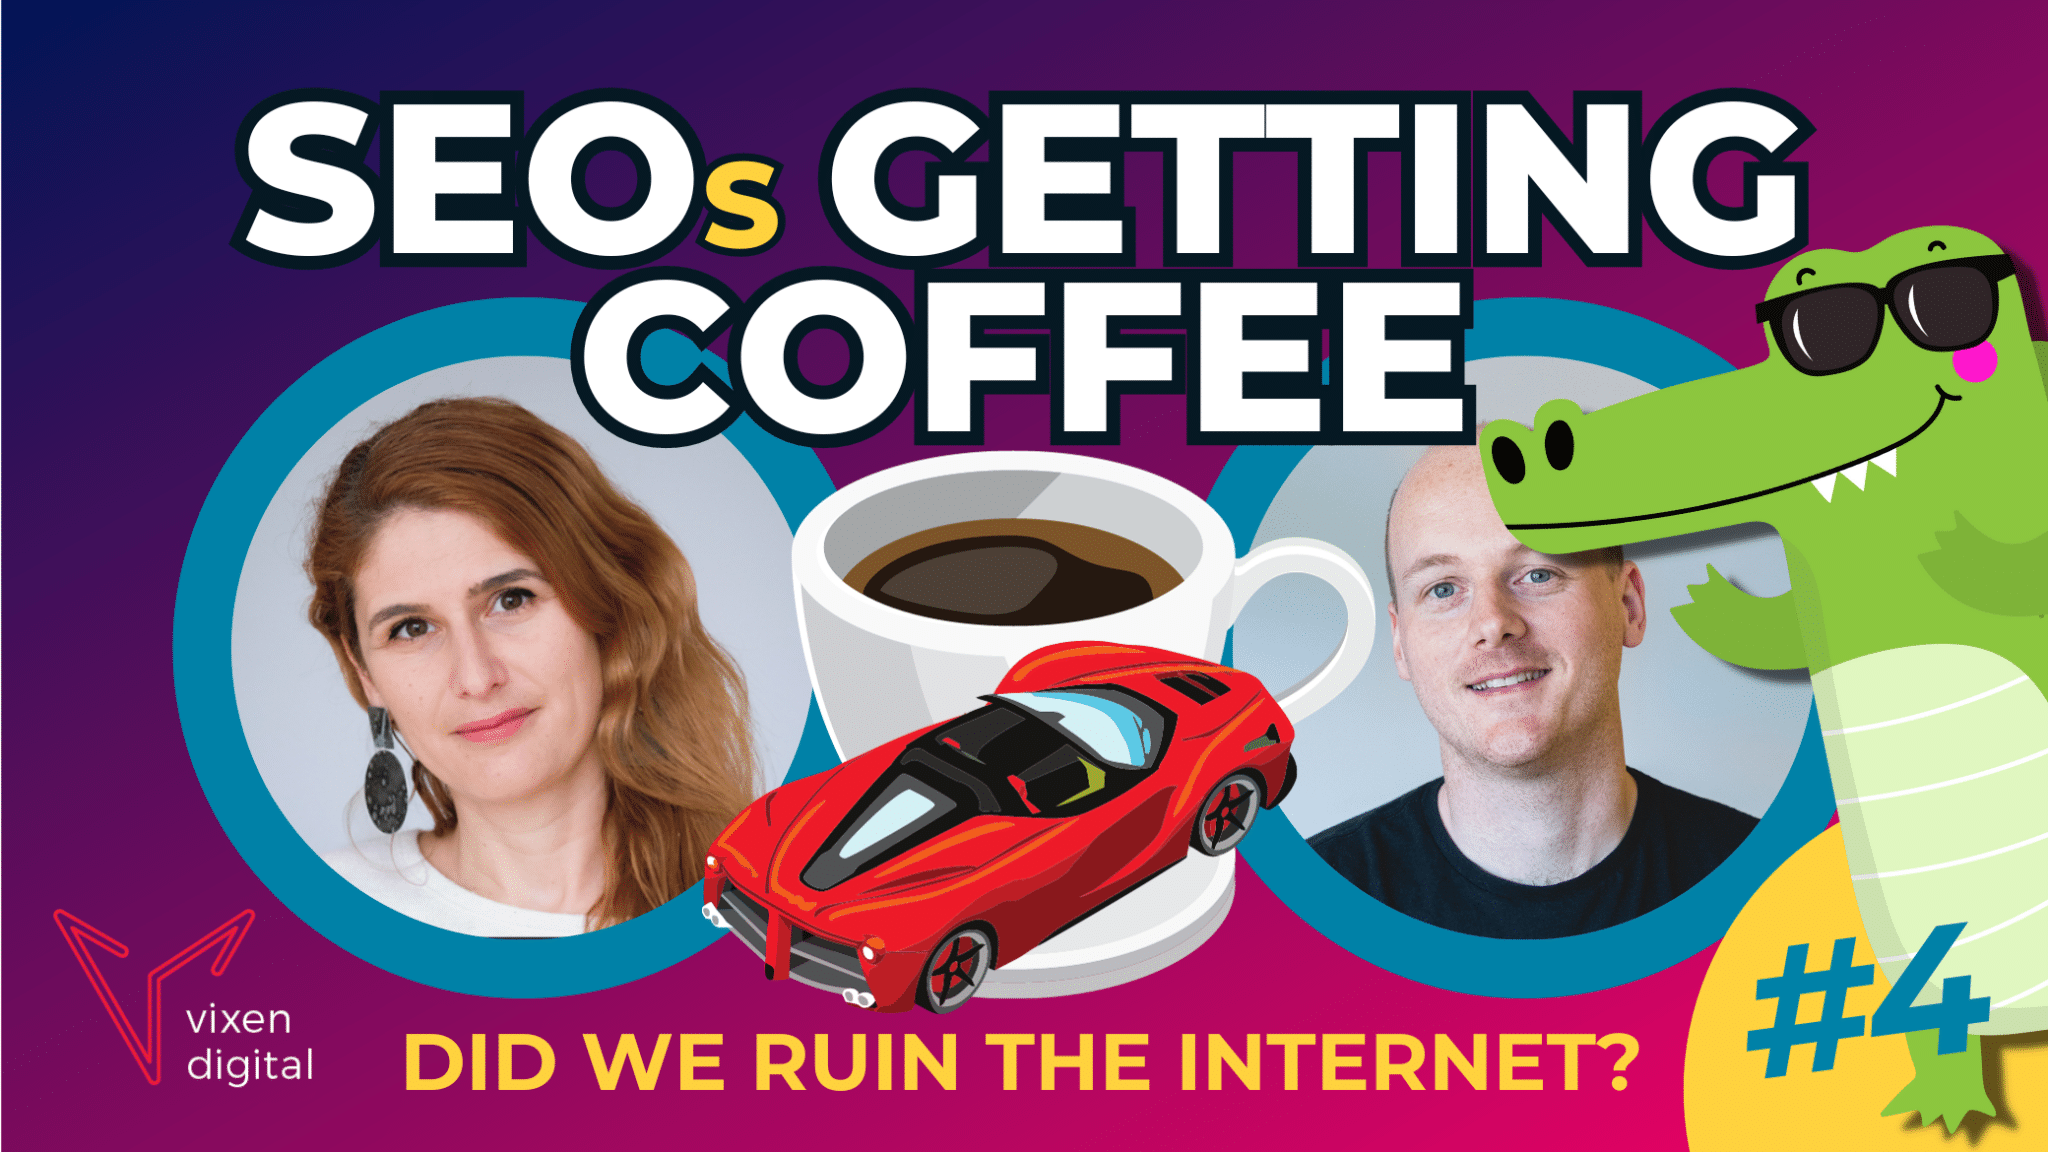 SEOs Getting Coffee: a Discussion on a Recent Controversial Article